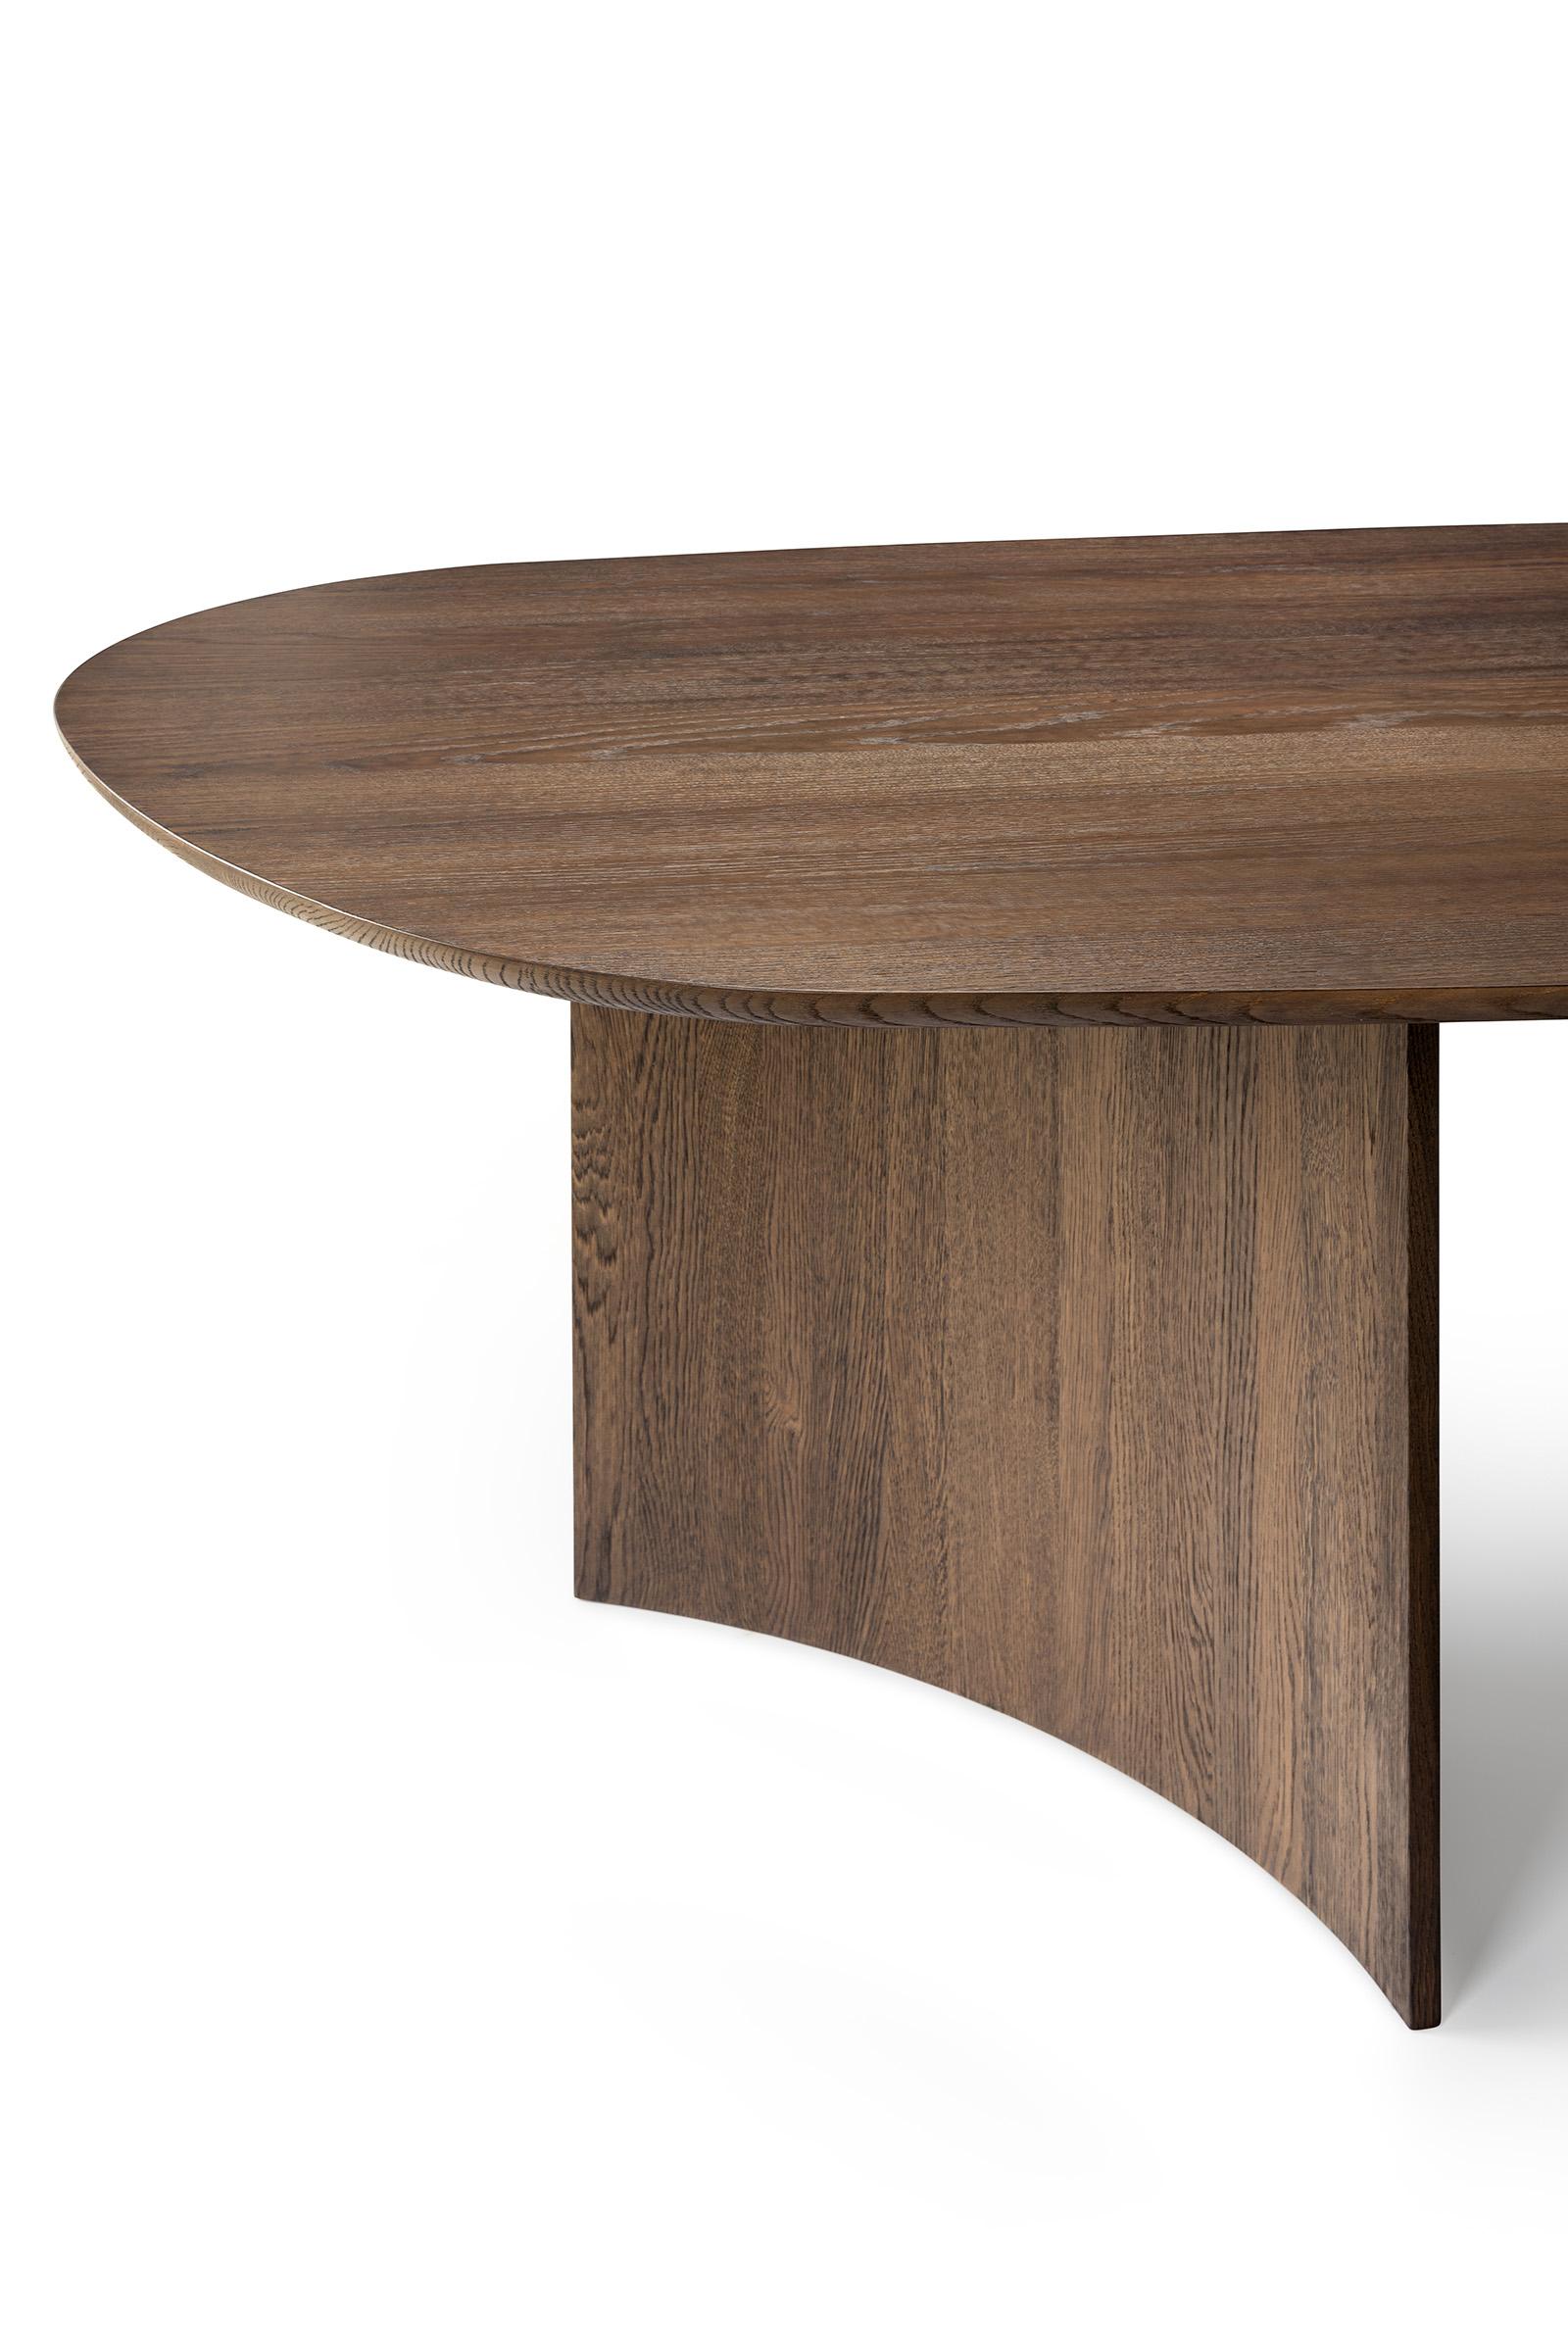 Contemporary Kluskens Organic Dining Table For Sale